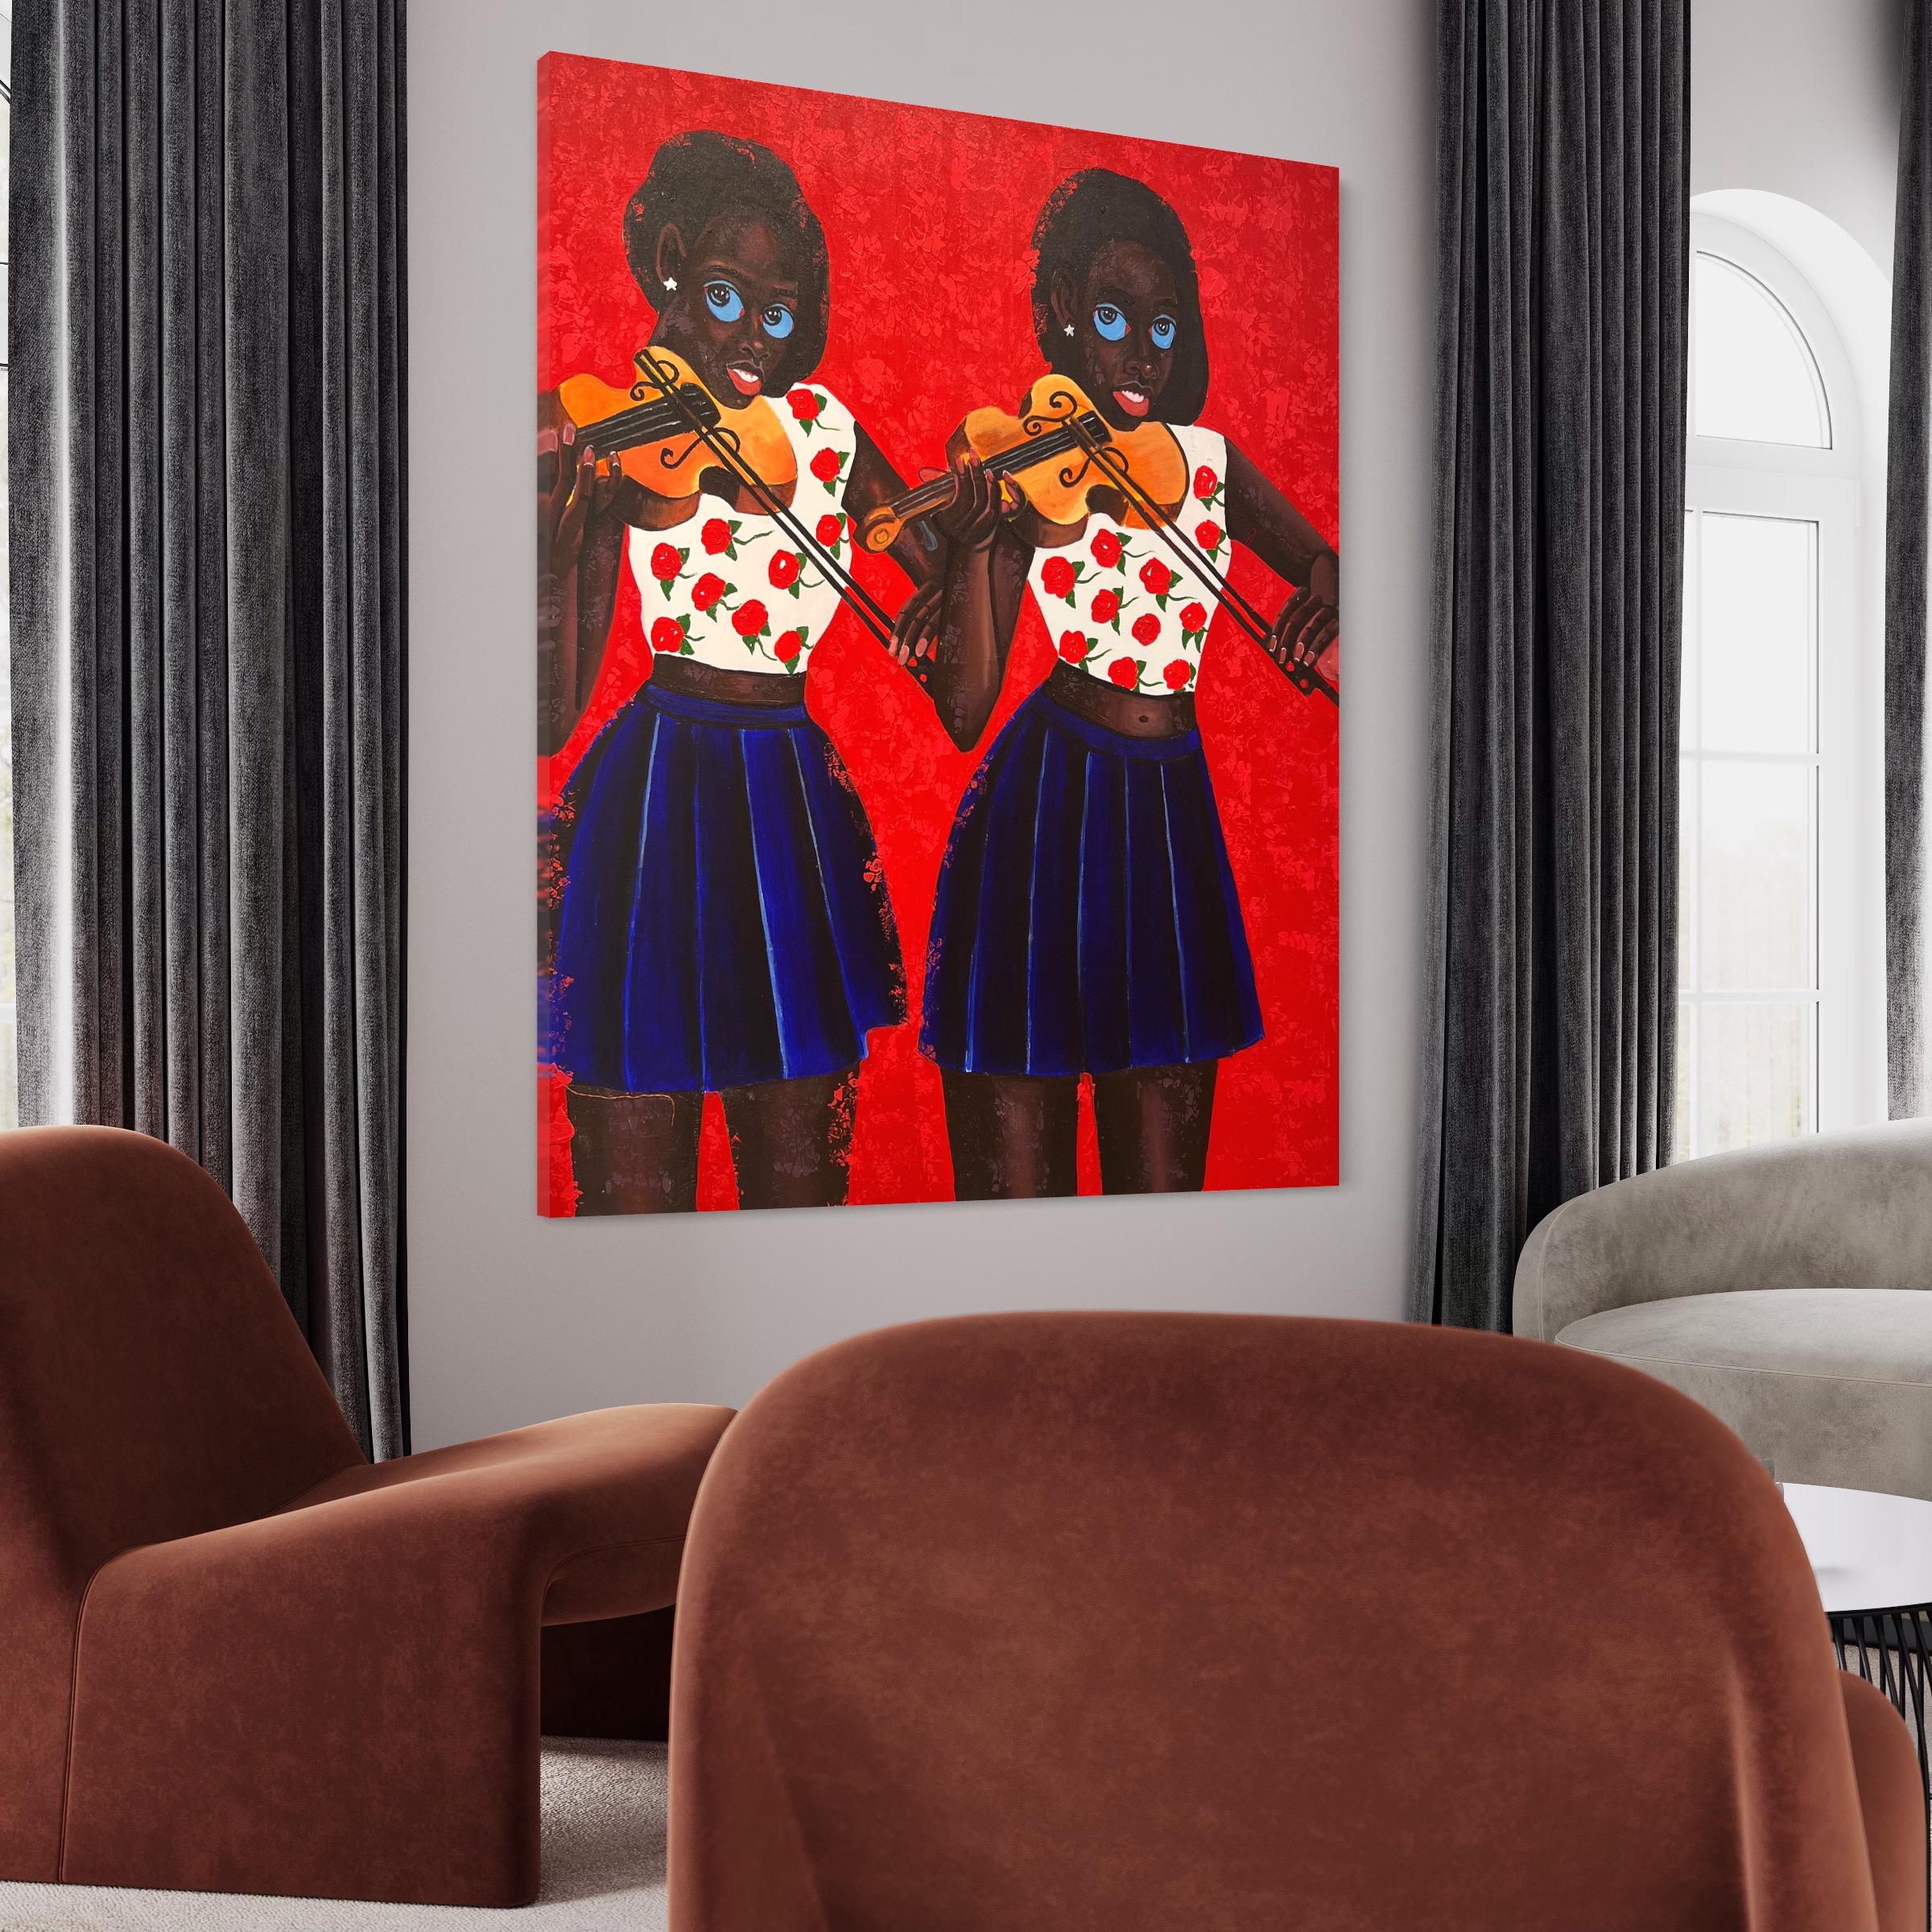 This large vertical painting measures 60 inches high and 48 inches wide. The sides are a continuation of the dyed linen. This artwork is stretched and ready to hang.

Philip Letsu is a Ghanaian artist currently living and working in Ho,